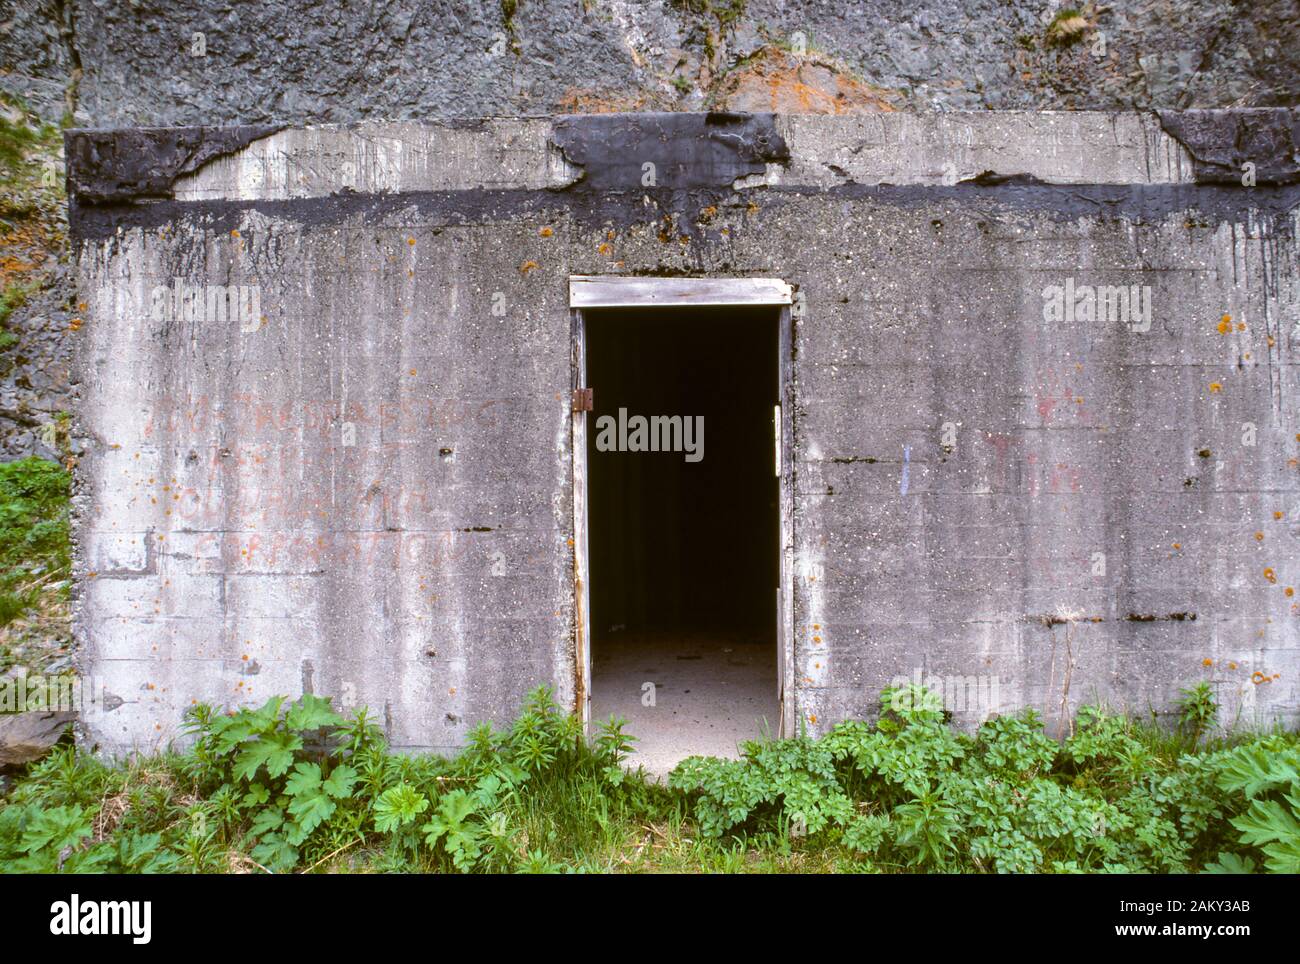 Bunkers & gun emplacements left from WWII, to fend off Japanese invasion of Dutch Harbor, Aleutian Islands Alaska. Stock Photo